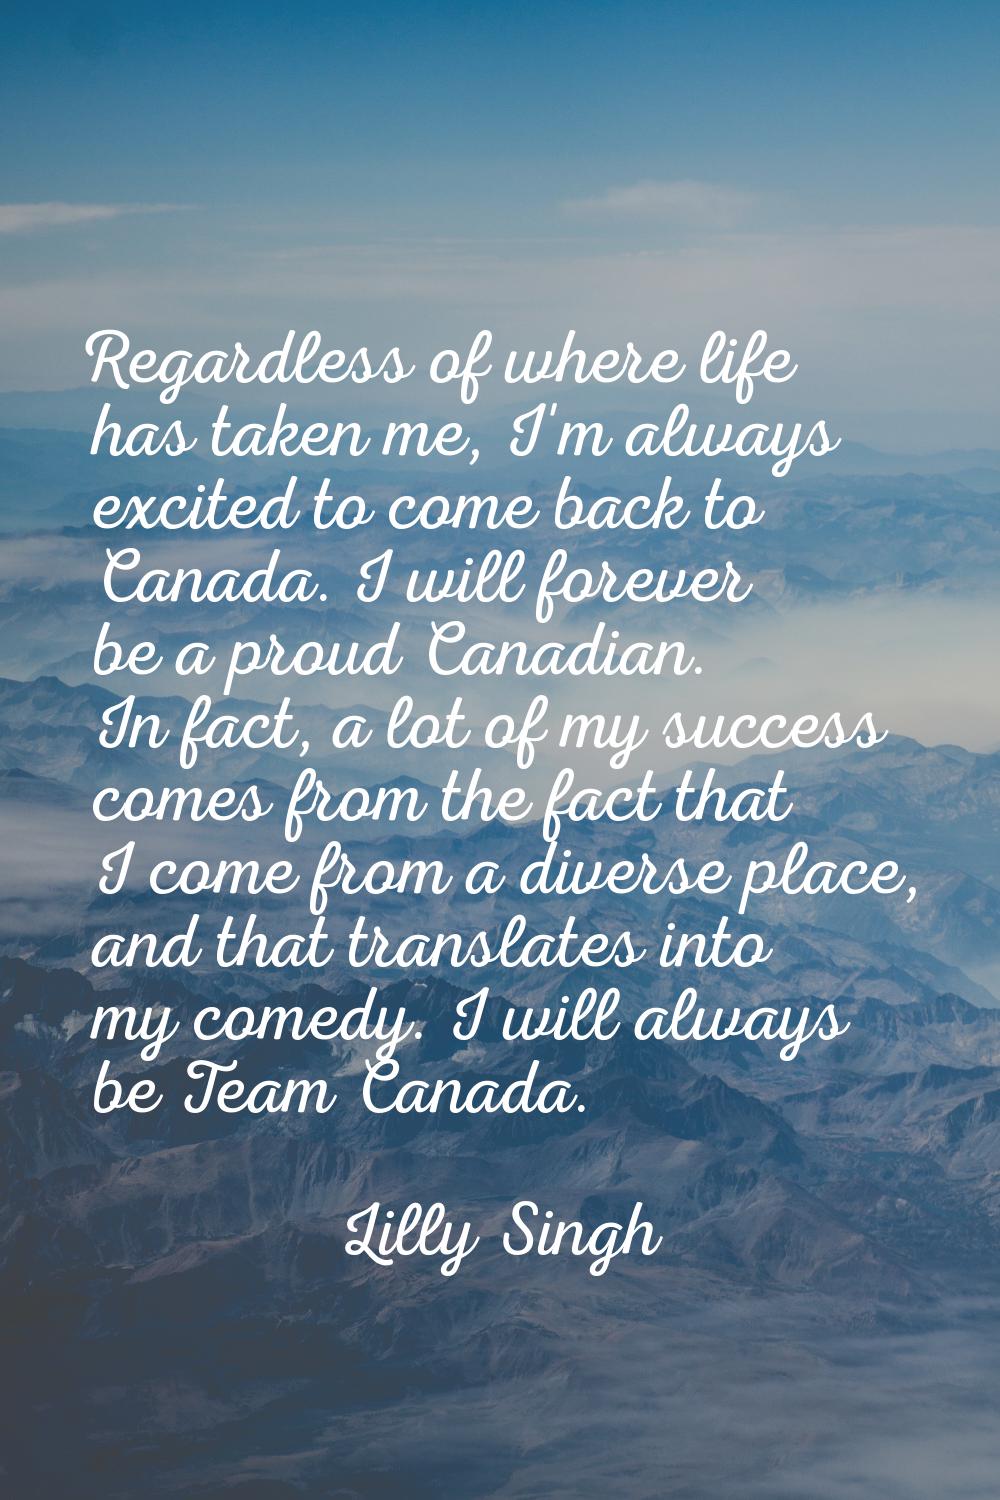 Regardless of where life has taken me, I'm always excited to come back to Canada. I will forever be